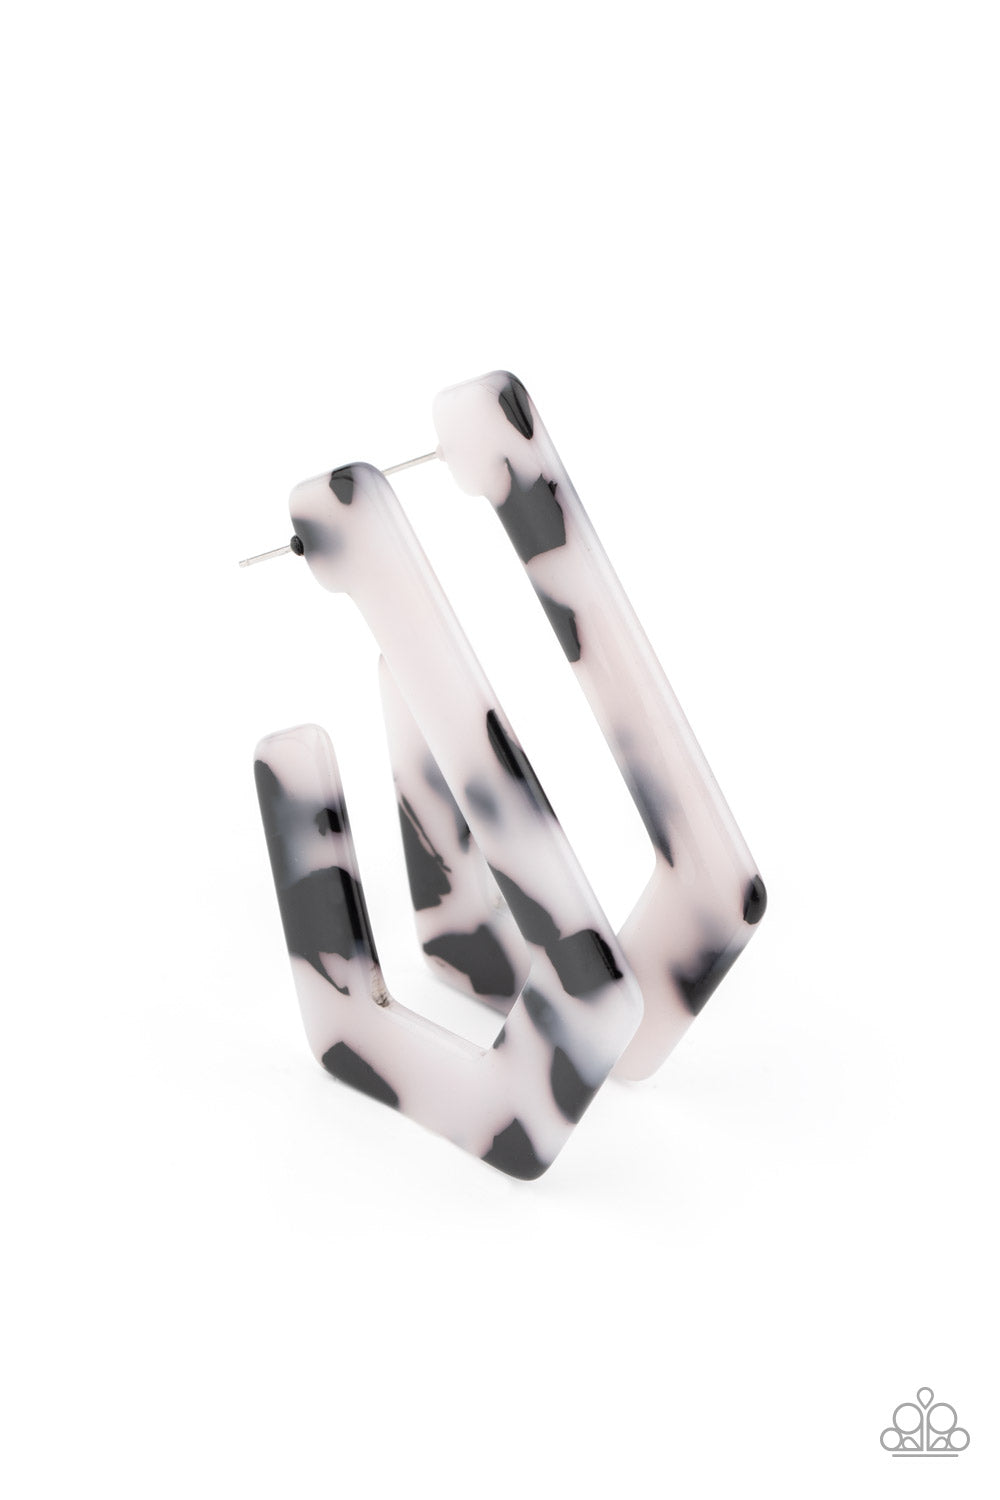 FLAT OUT FEARLESS - WHITE AND BLACK COW ACRYLIC GEOMETRIC HOOP EARRINGS